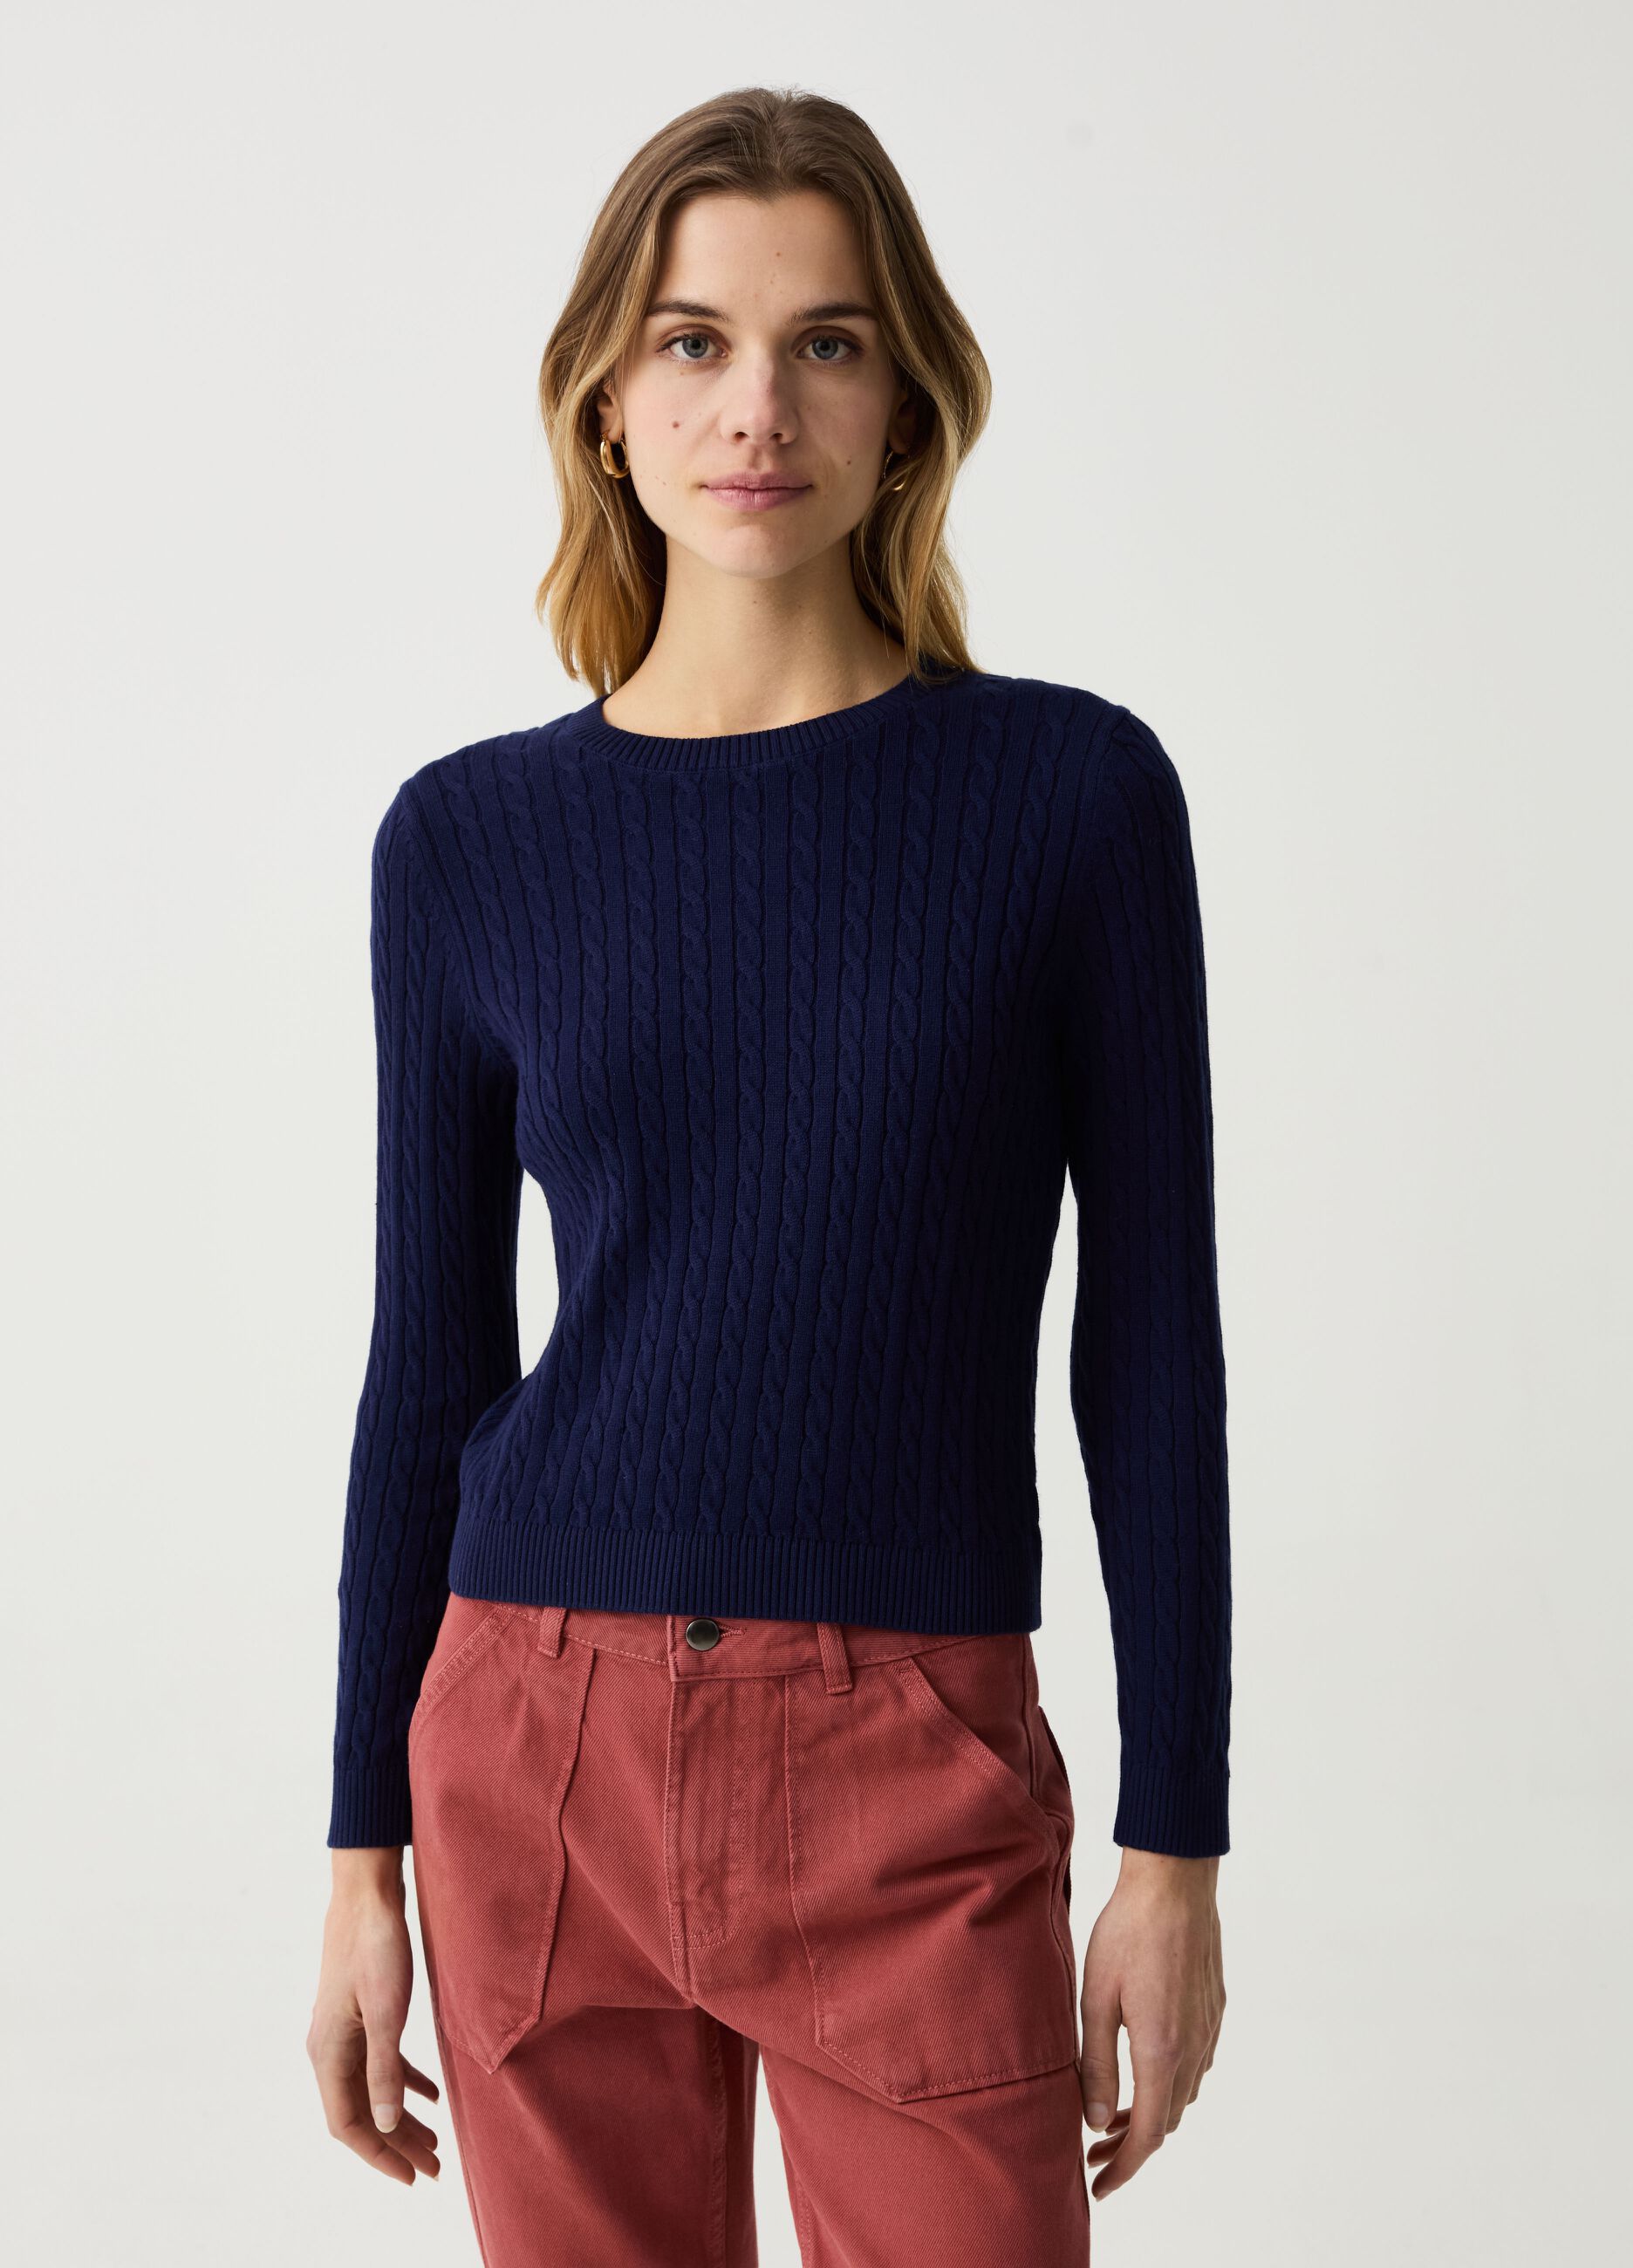 Cotton pullover with cable-knit design